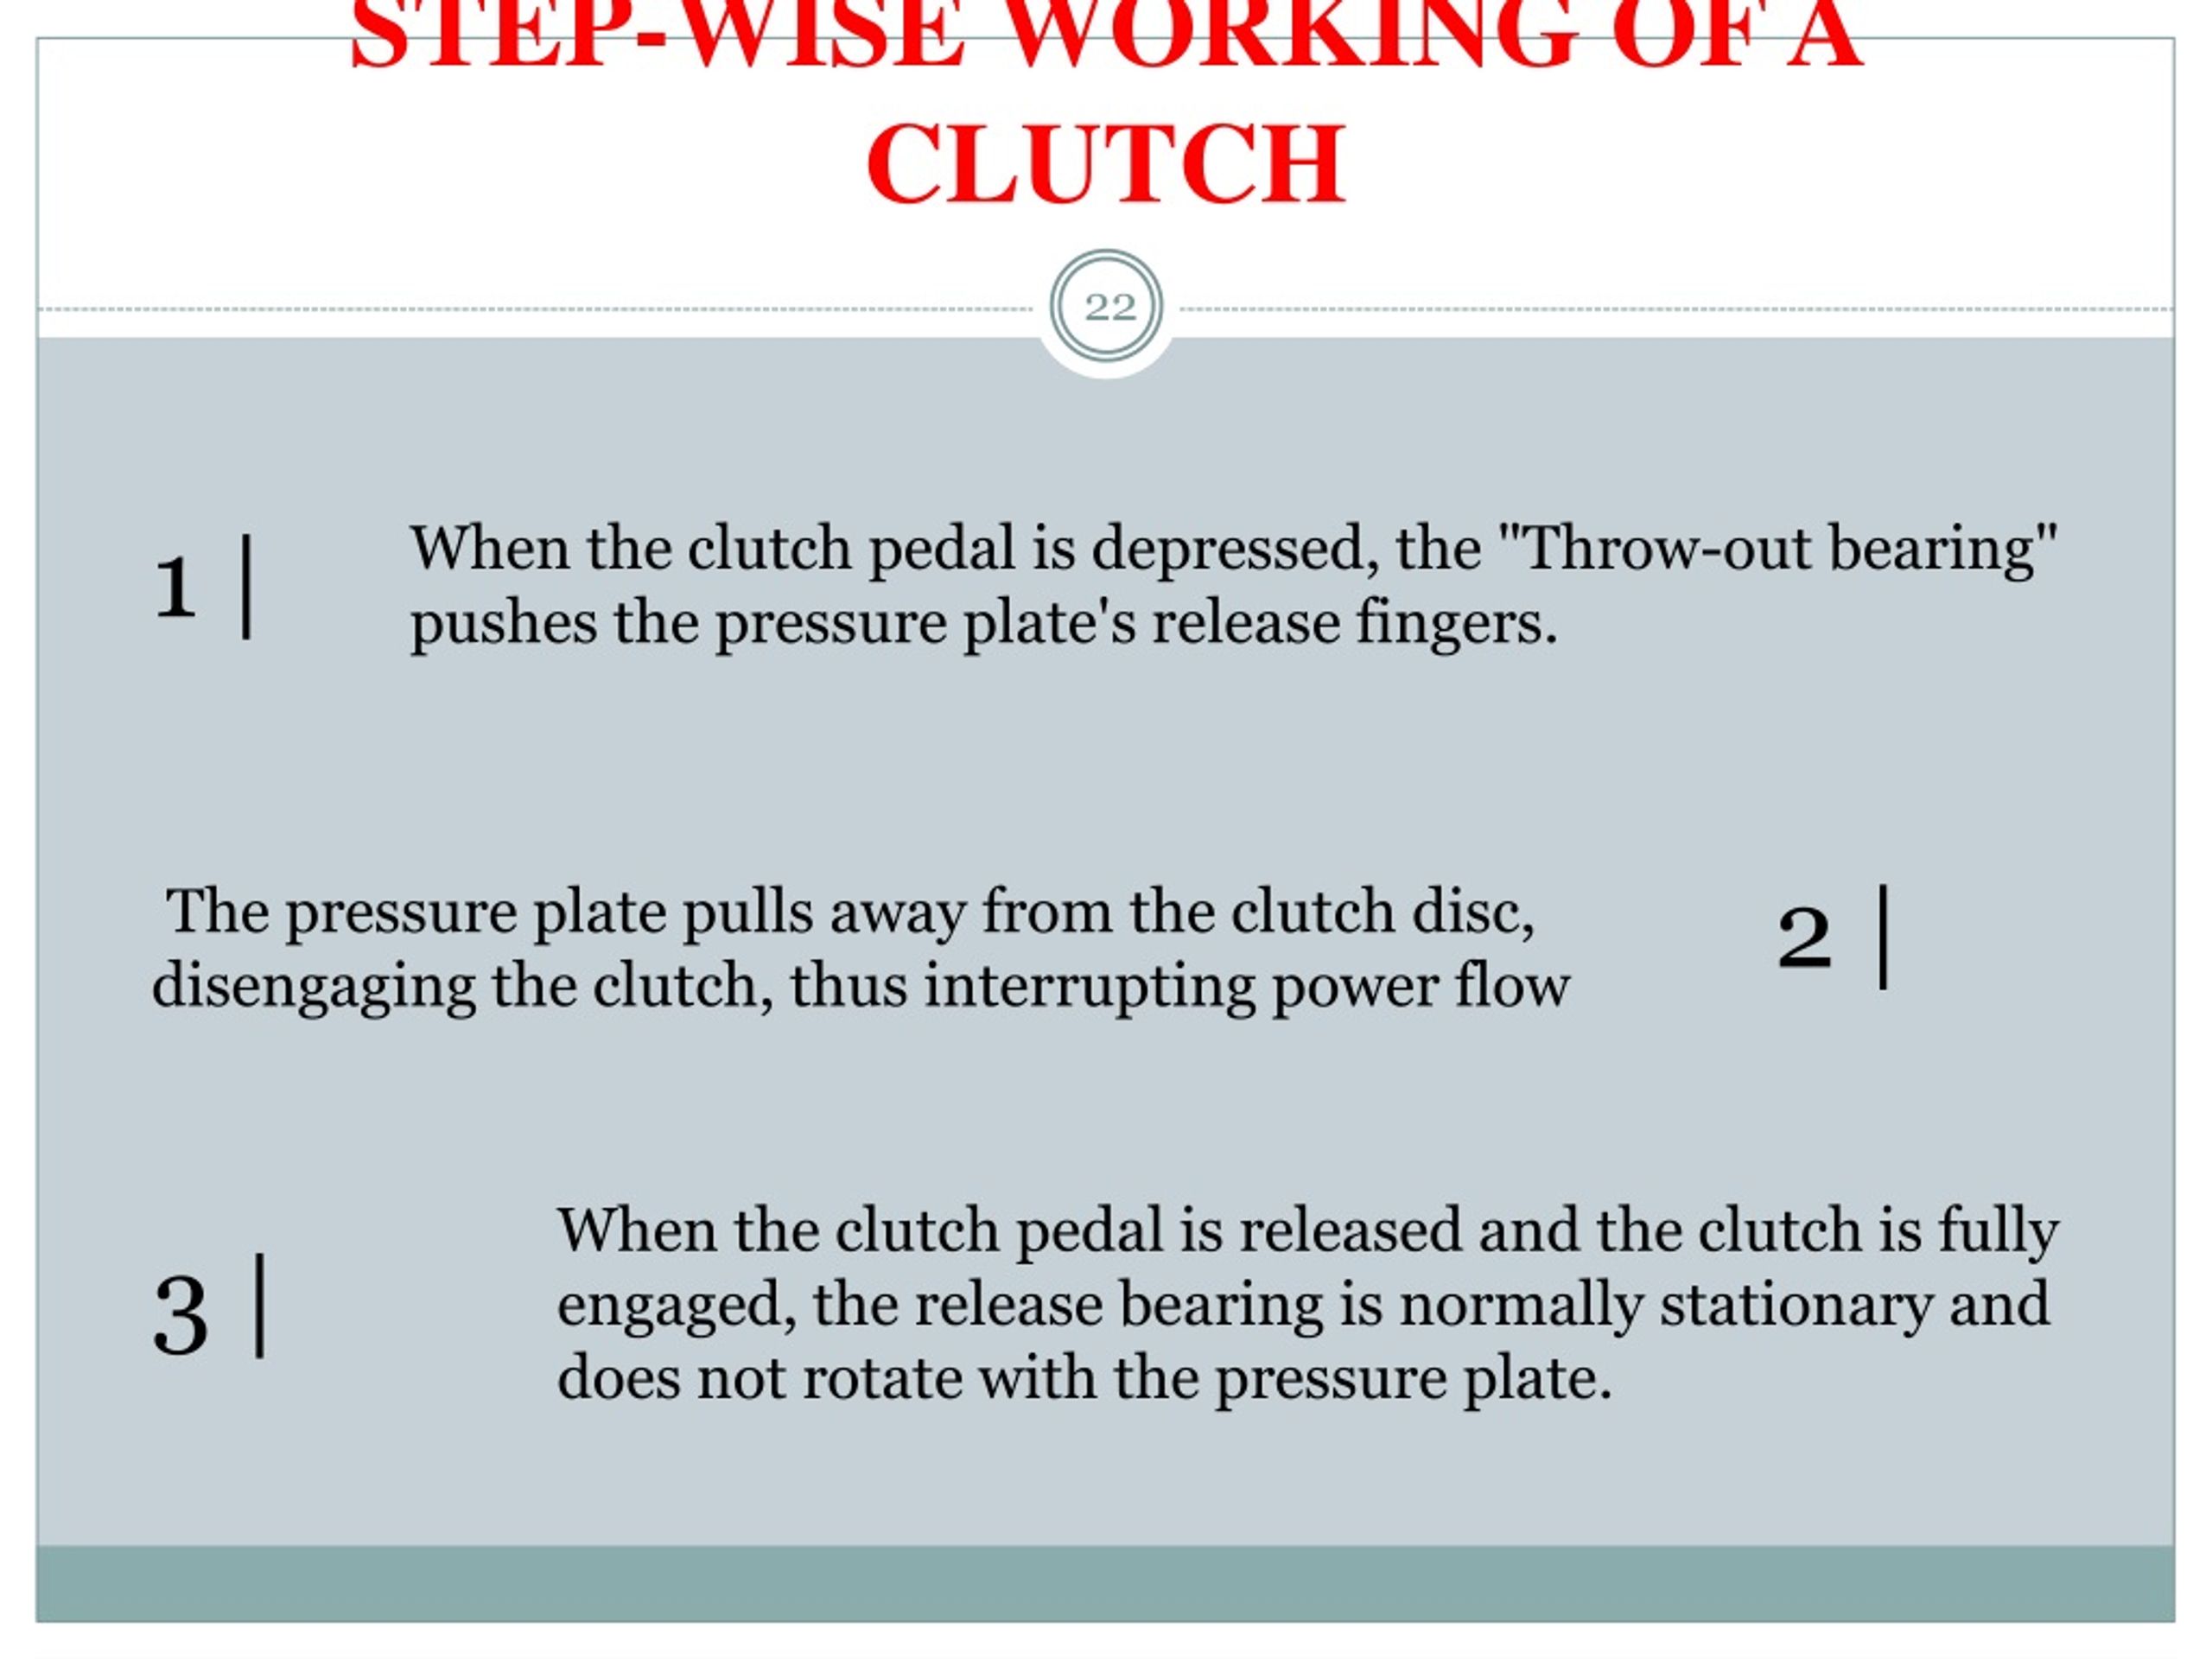 Clutches. - ppt video online download